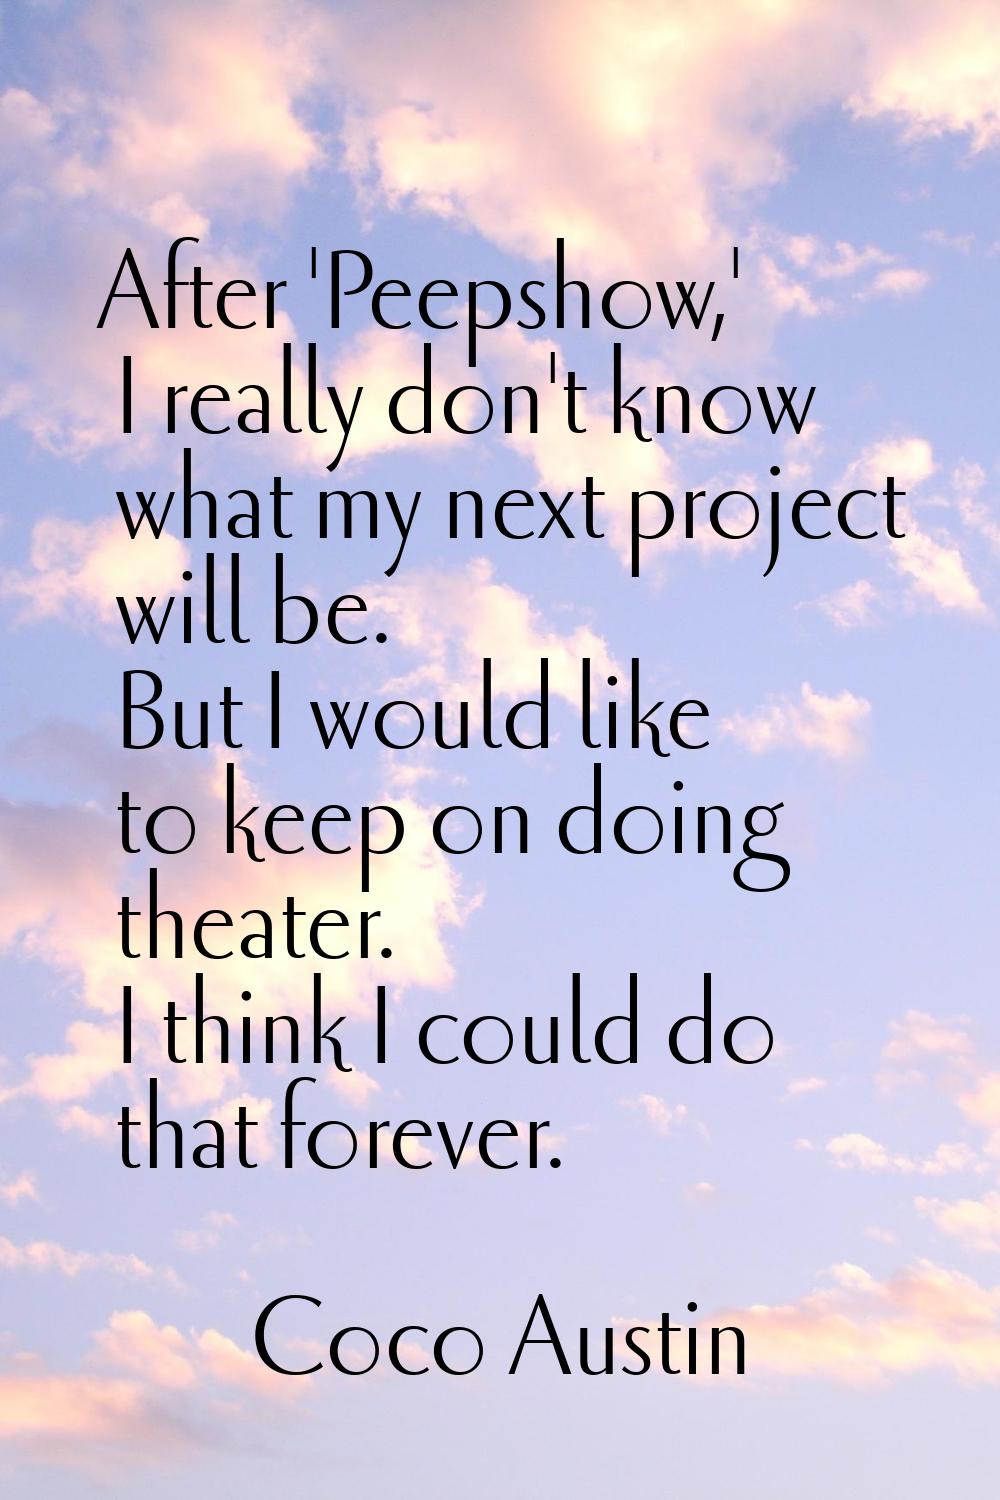 After 'Peepshow,' I really don't know what my next project will be. But I would like to keep on doi